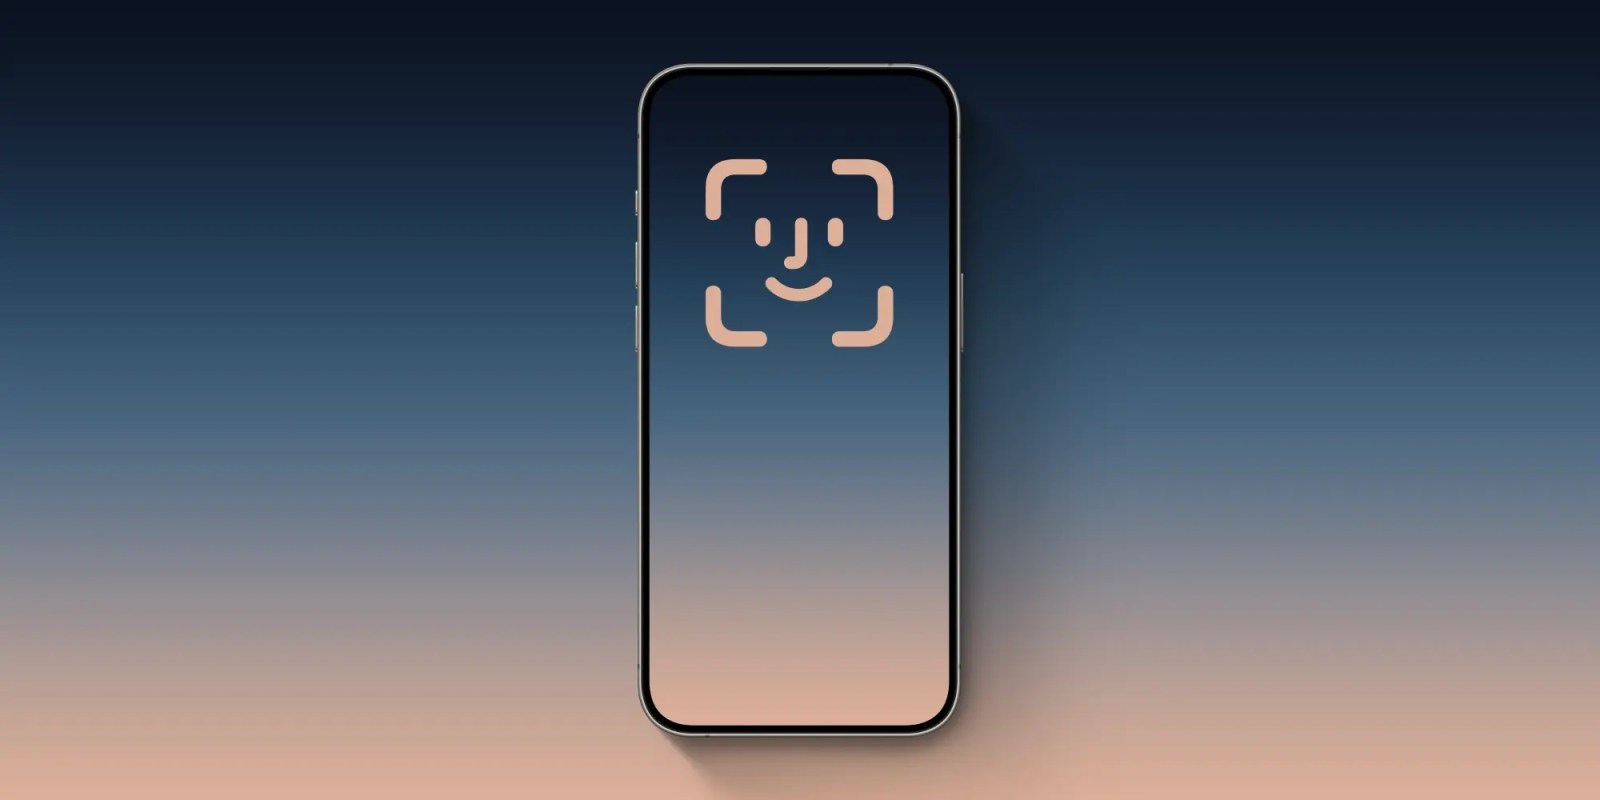 Under-screen Face ID | 9to5Mac render of later all-screen design